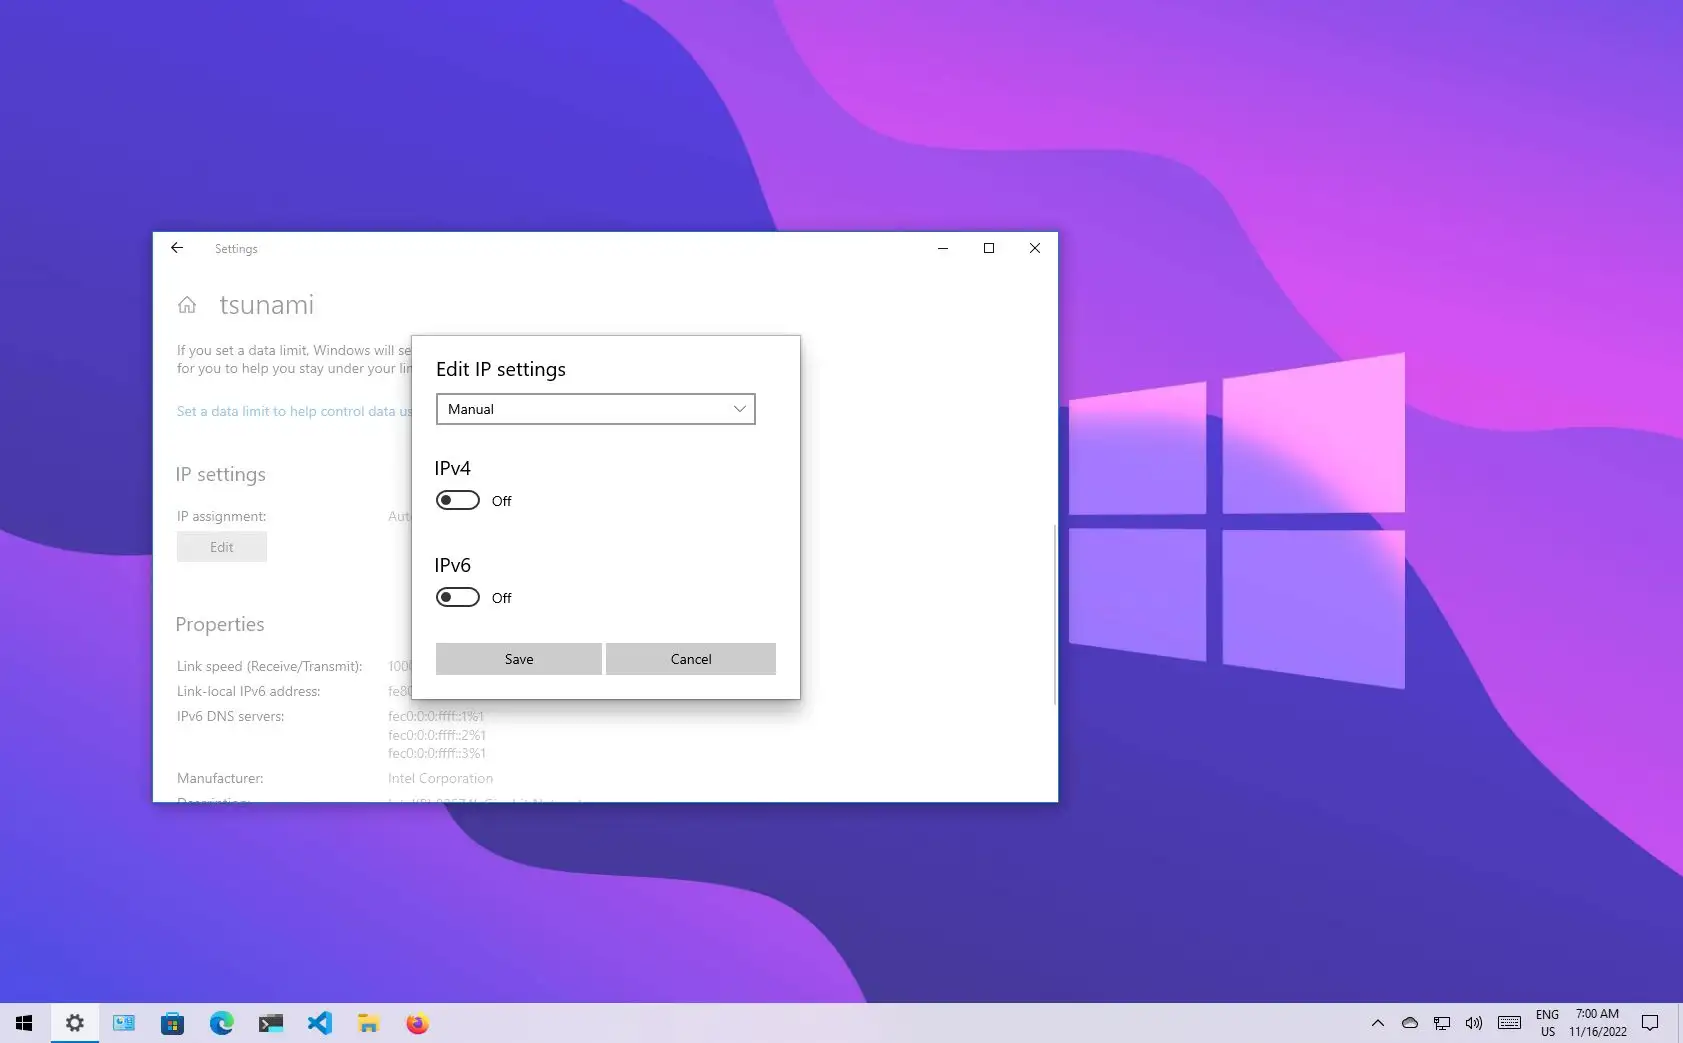 Enable color filters (accessibility) on Windows 11 - Pureinfotech